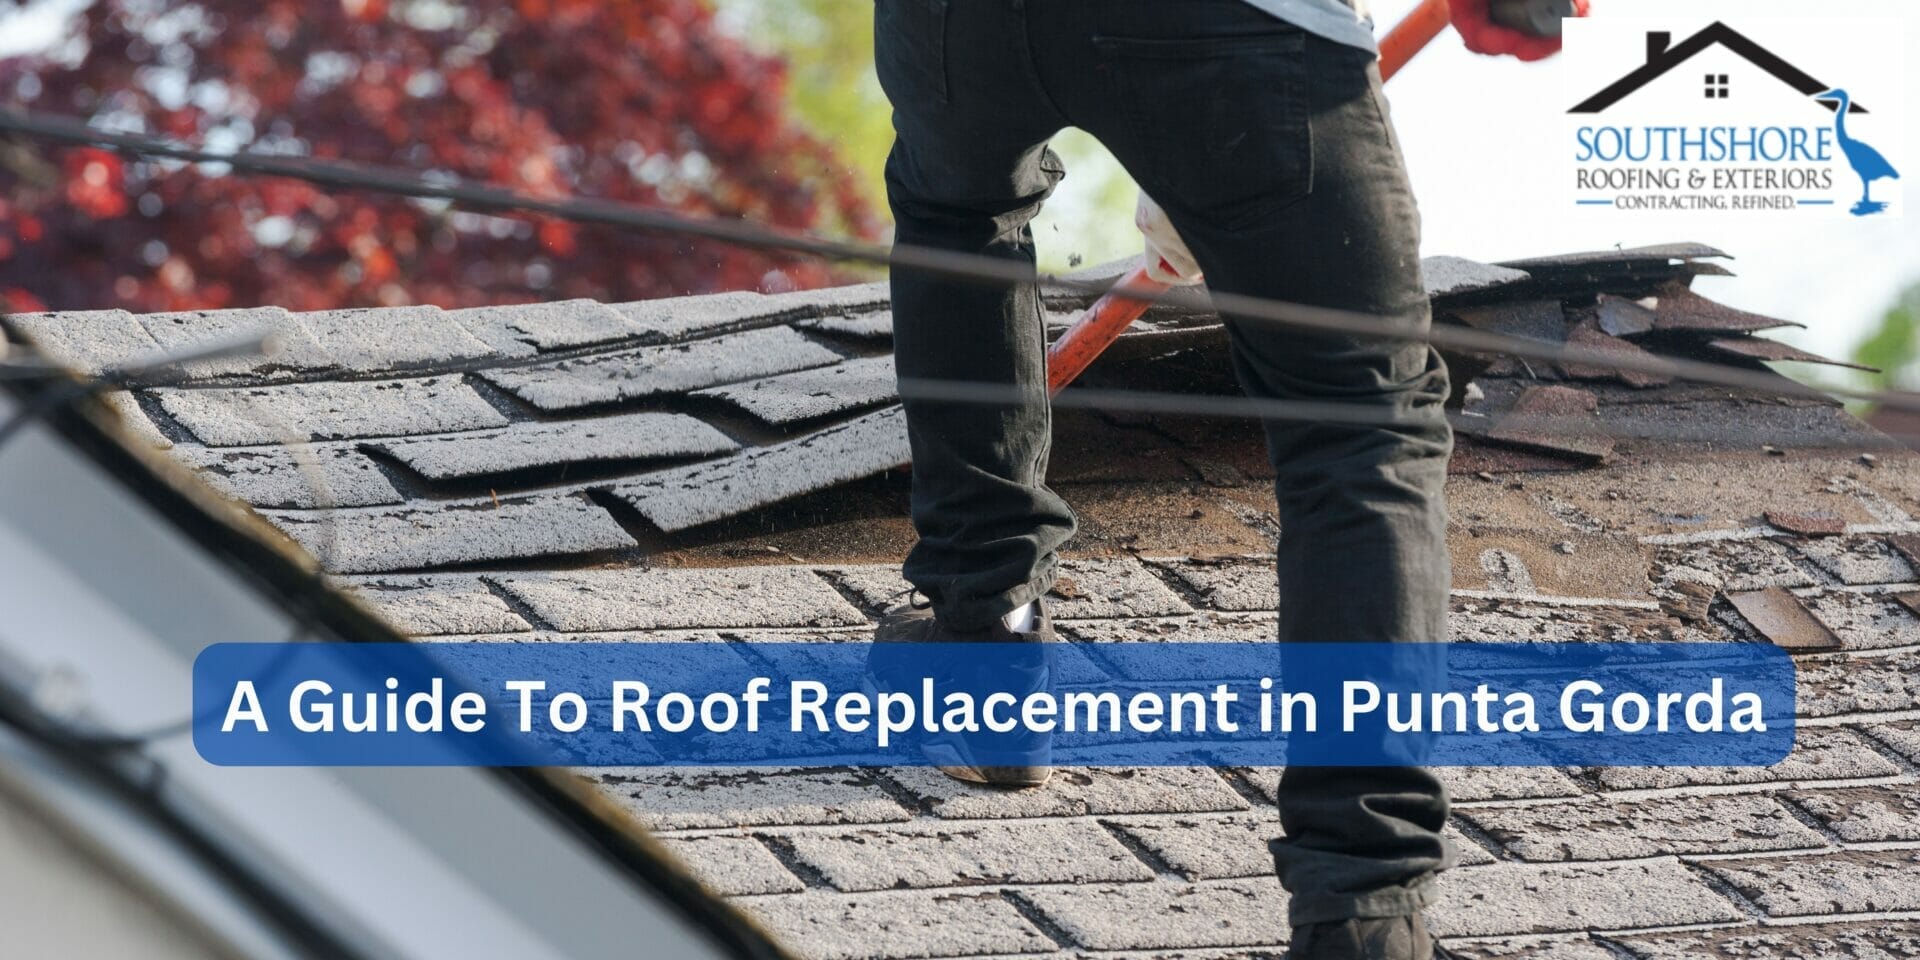 Hurricane Ian’s Aftermath: A Guide To Roof Replacement in Punta Gorda